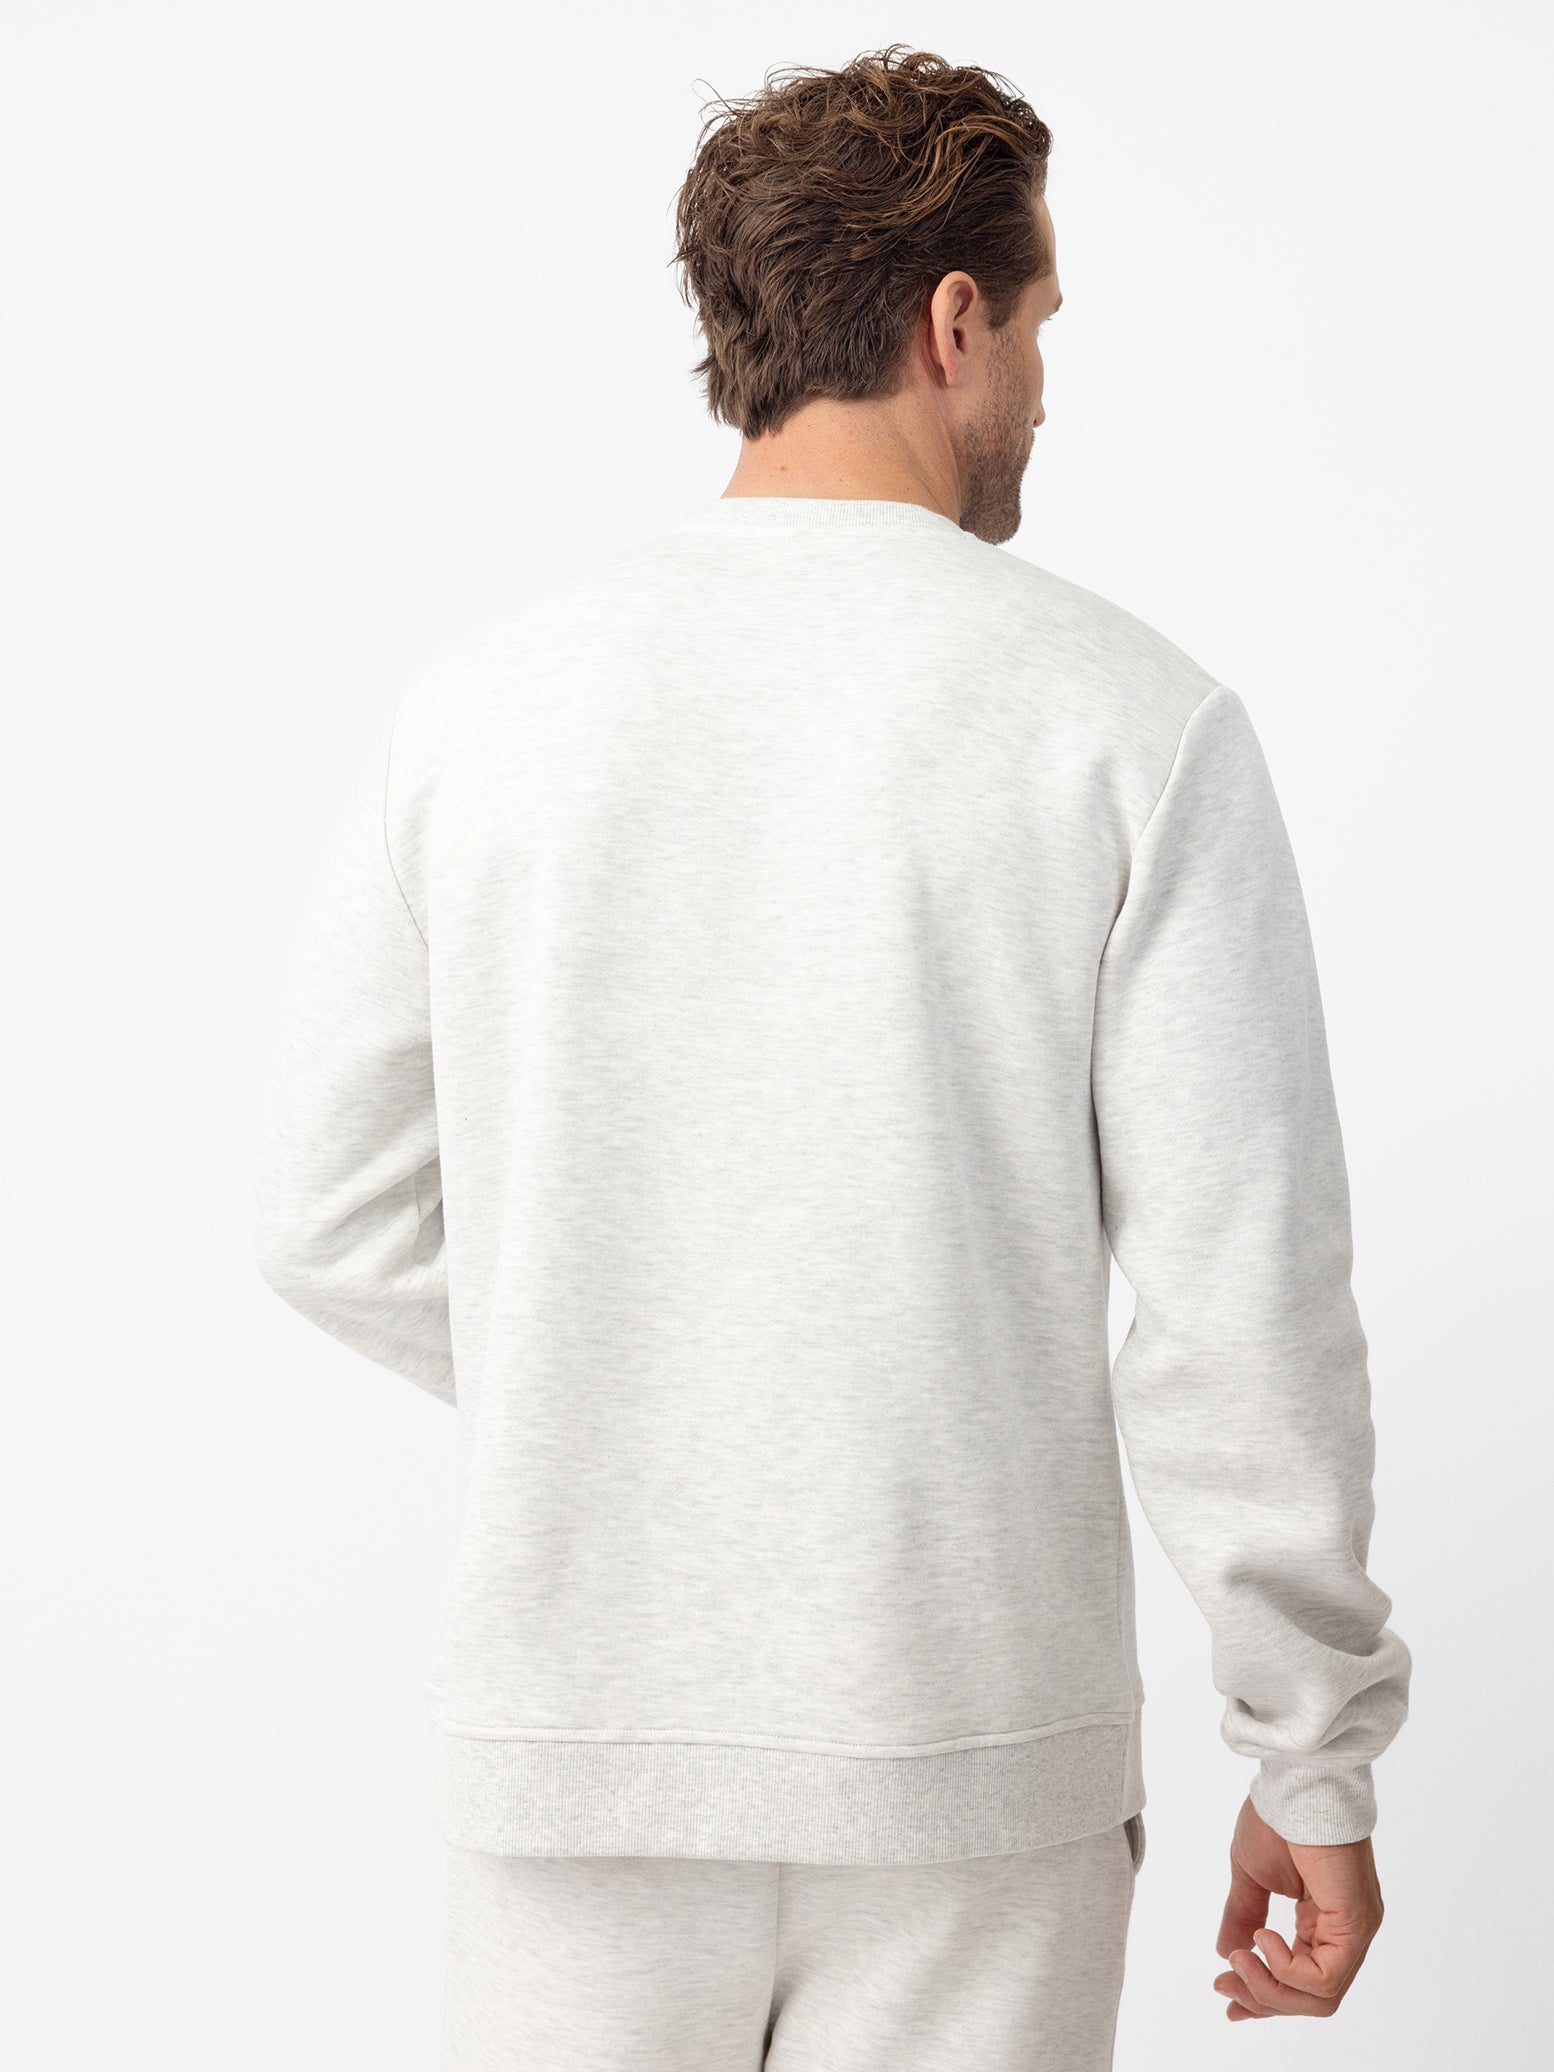 Back of man wearing heather grey cityscape pullover 